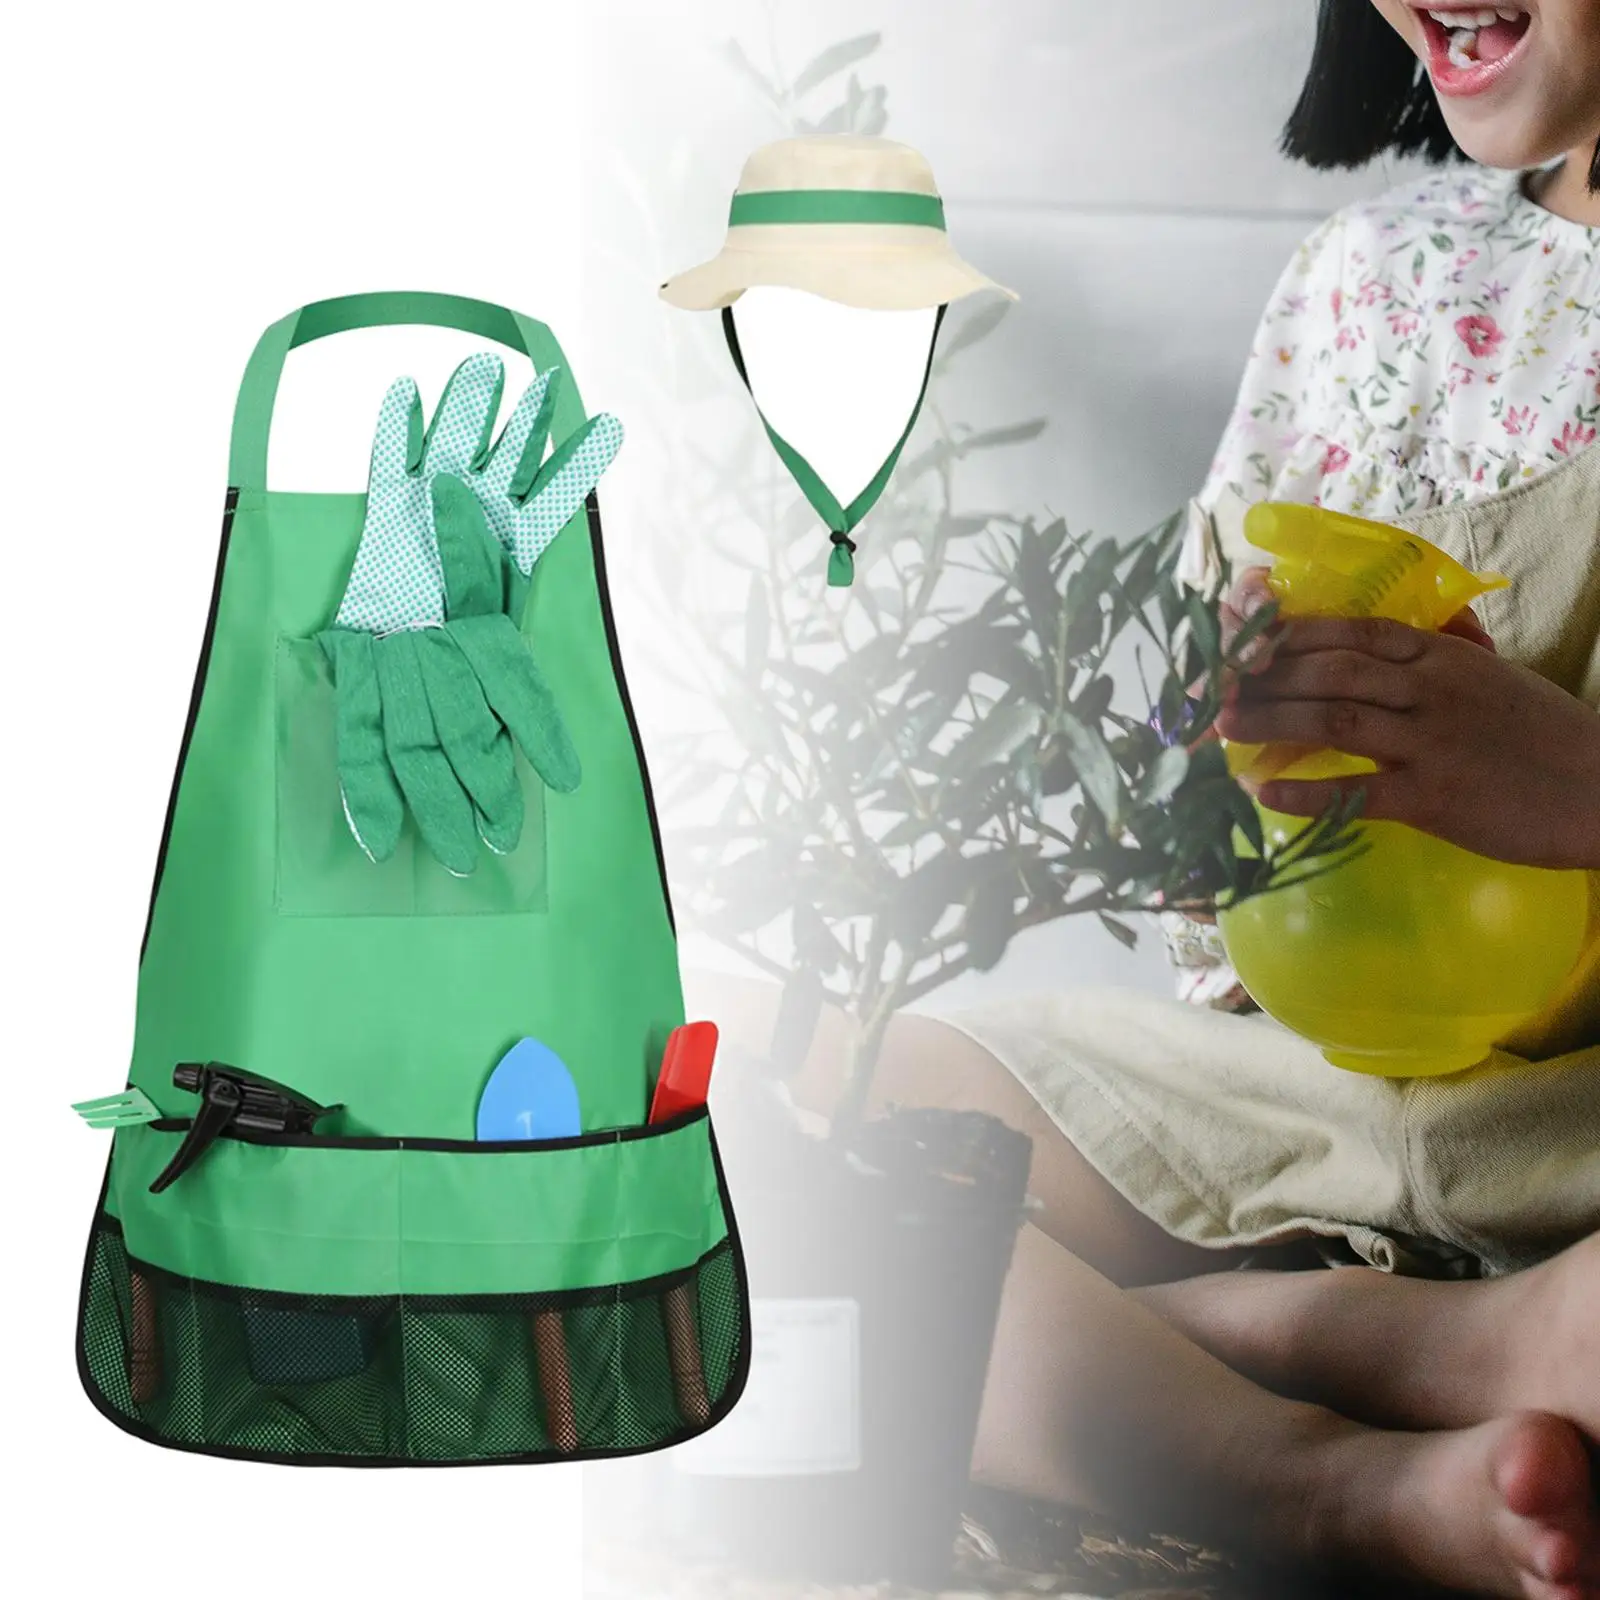 Mini Spade Gloves Apron Garden Pretend Toy Role Play Little Gardeners Playset Toddlers Gardening Tool Kits for Preschool Age 3-6